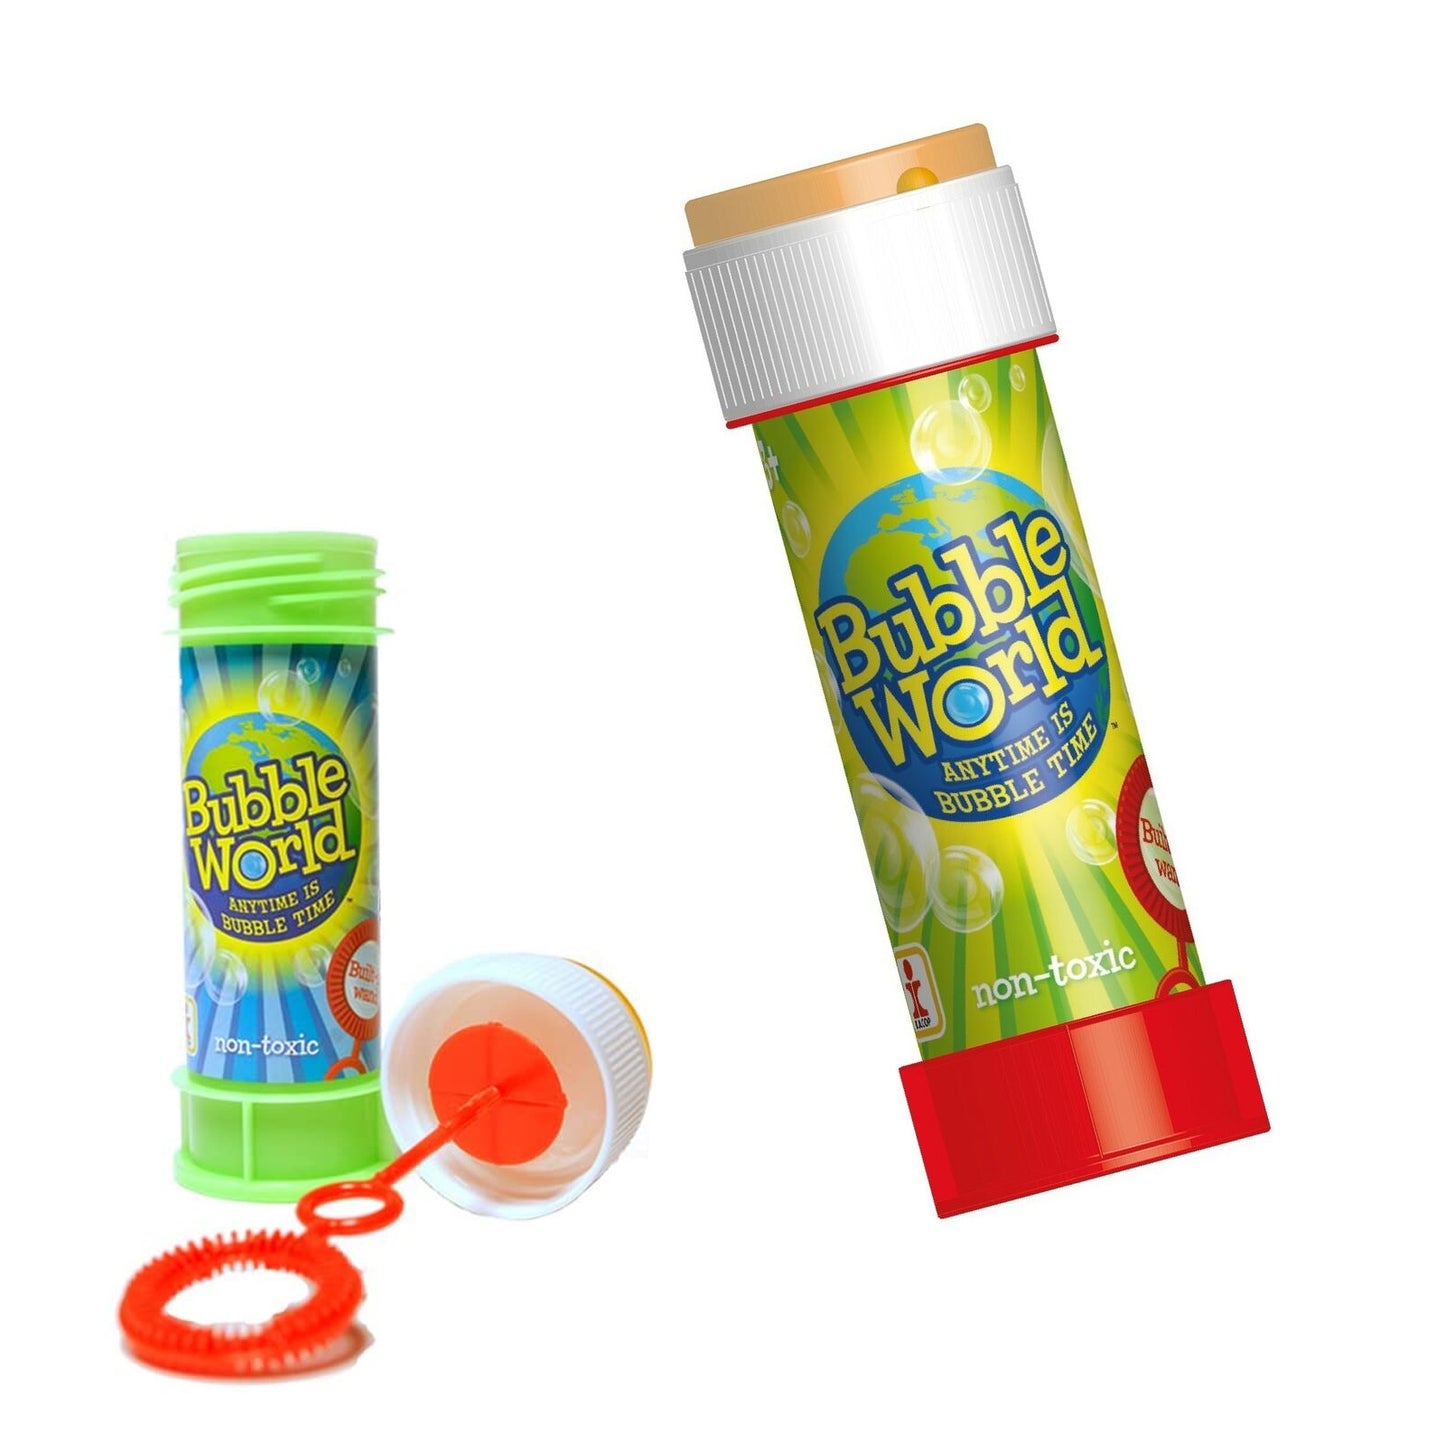 Bubble World Fun Bubble Bottle - Bubbles for Kids - Non-Toxic Bubbles with Built-In Wand for Mess-Free Play (1 Random Color Pick)